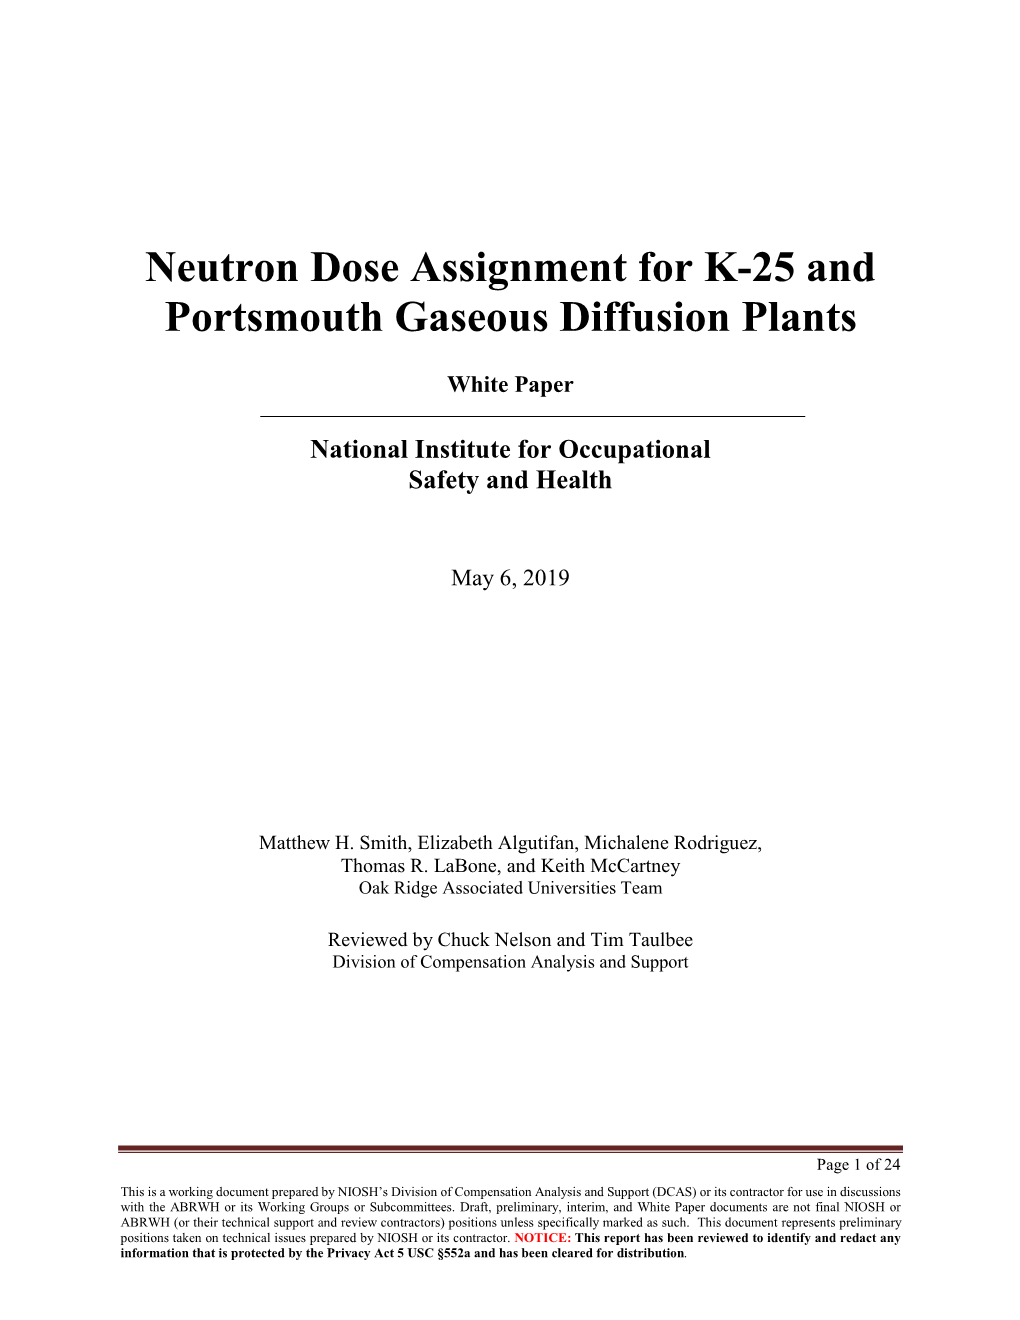 Neutron Dose Assignment for K-25 and Portsmouth Gaseous Diffusion Plants